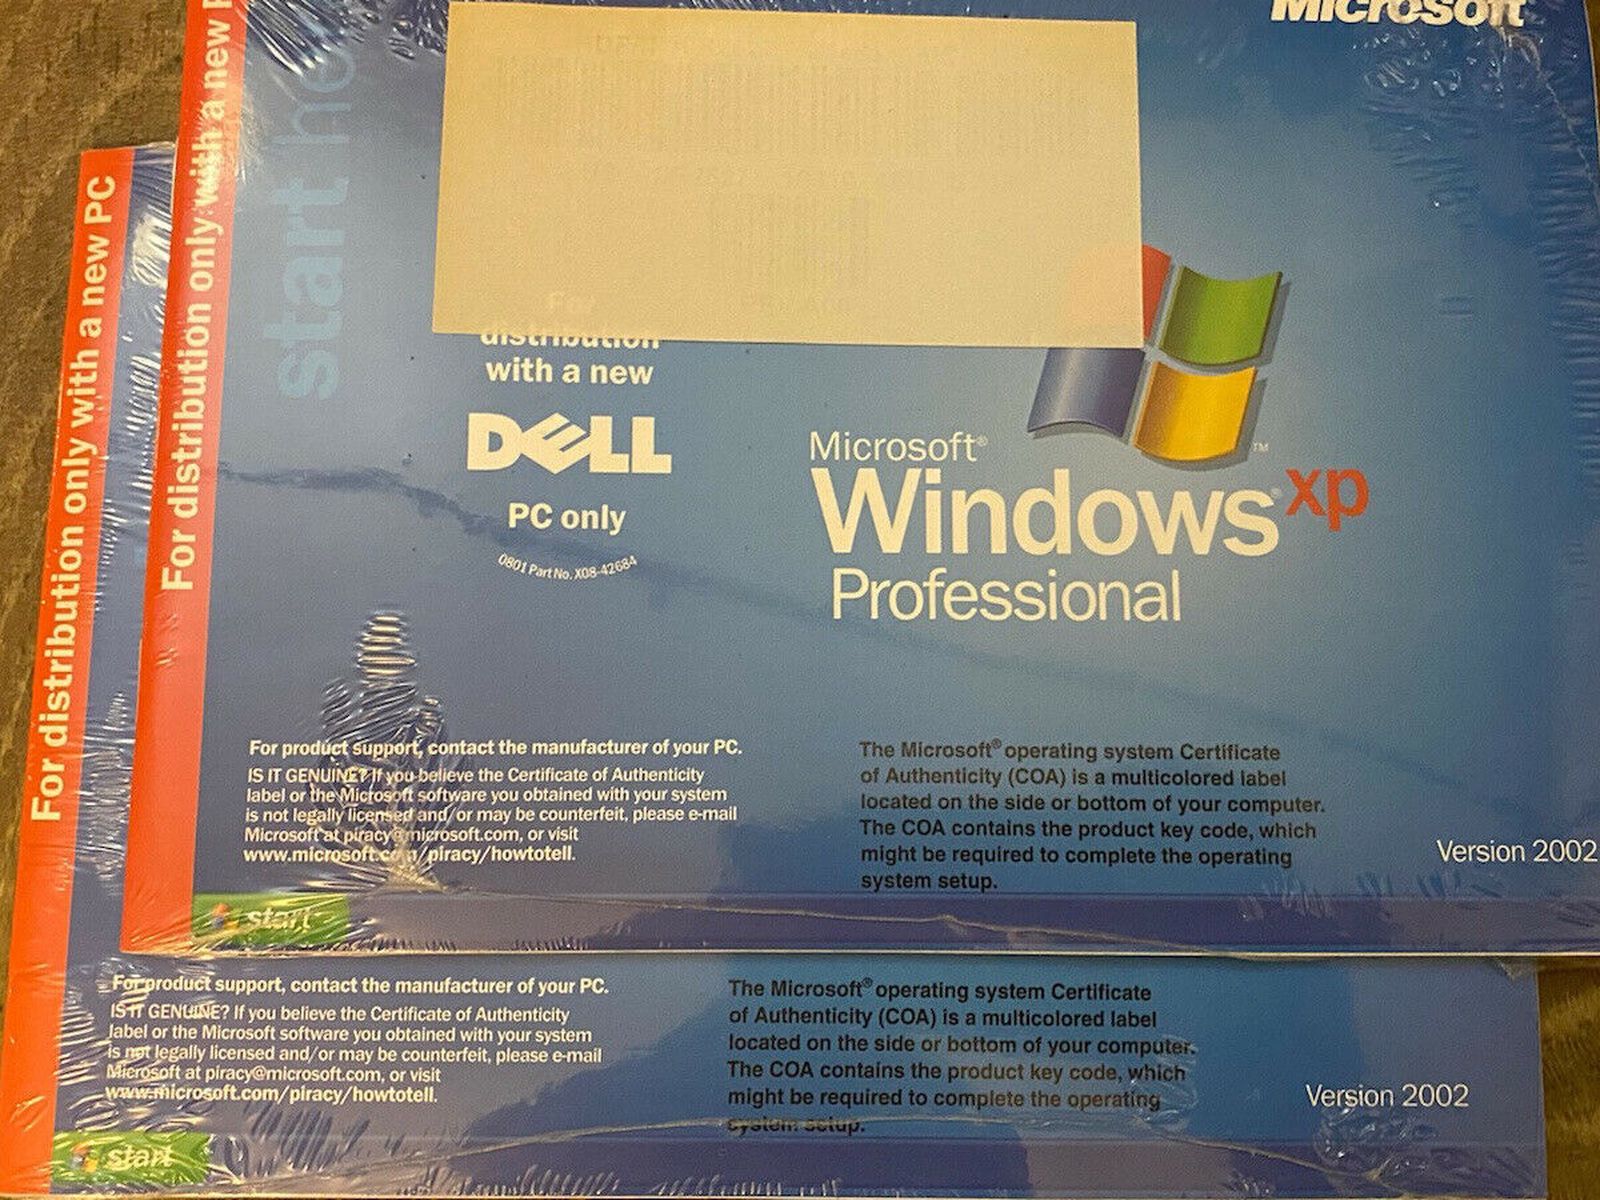 Windows XP reinstalling CD for DELL only